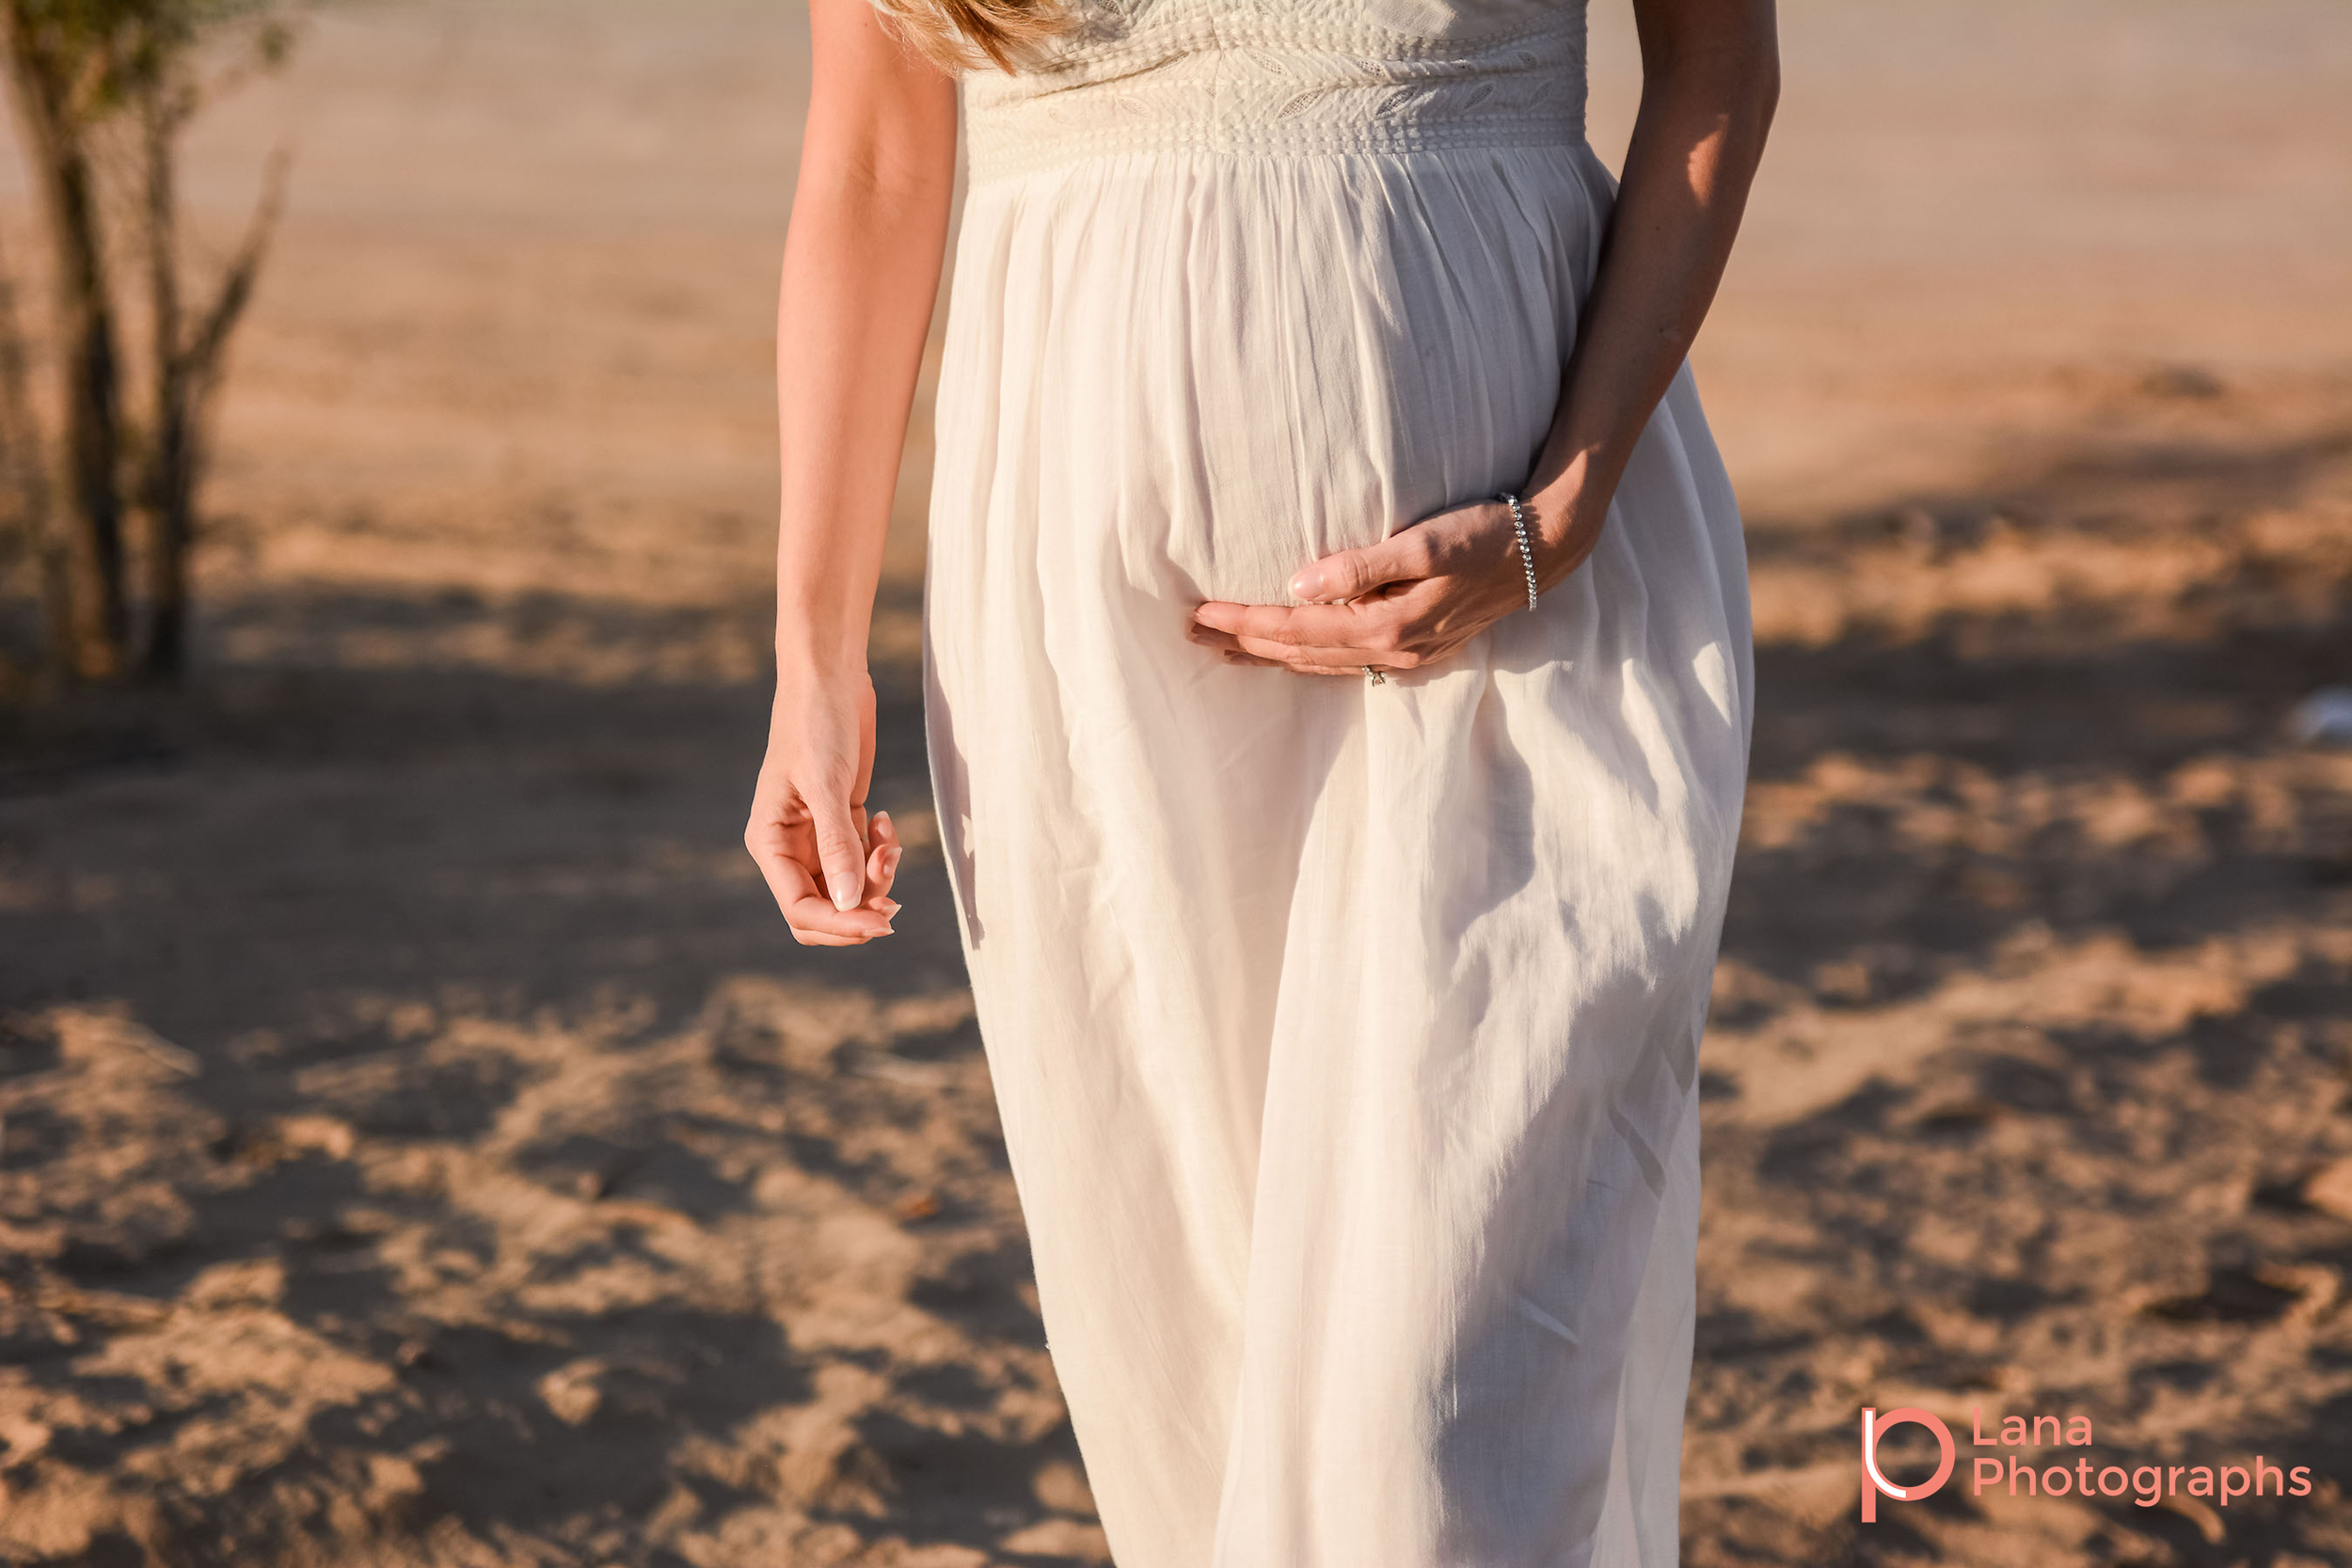 Dubai Maternity Photography portrait of pregnant woman's belly as she is walking towards camera in the desert